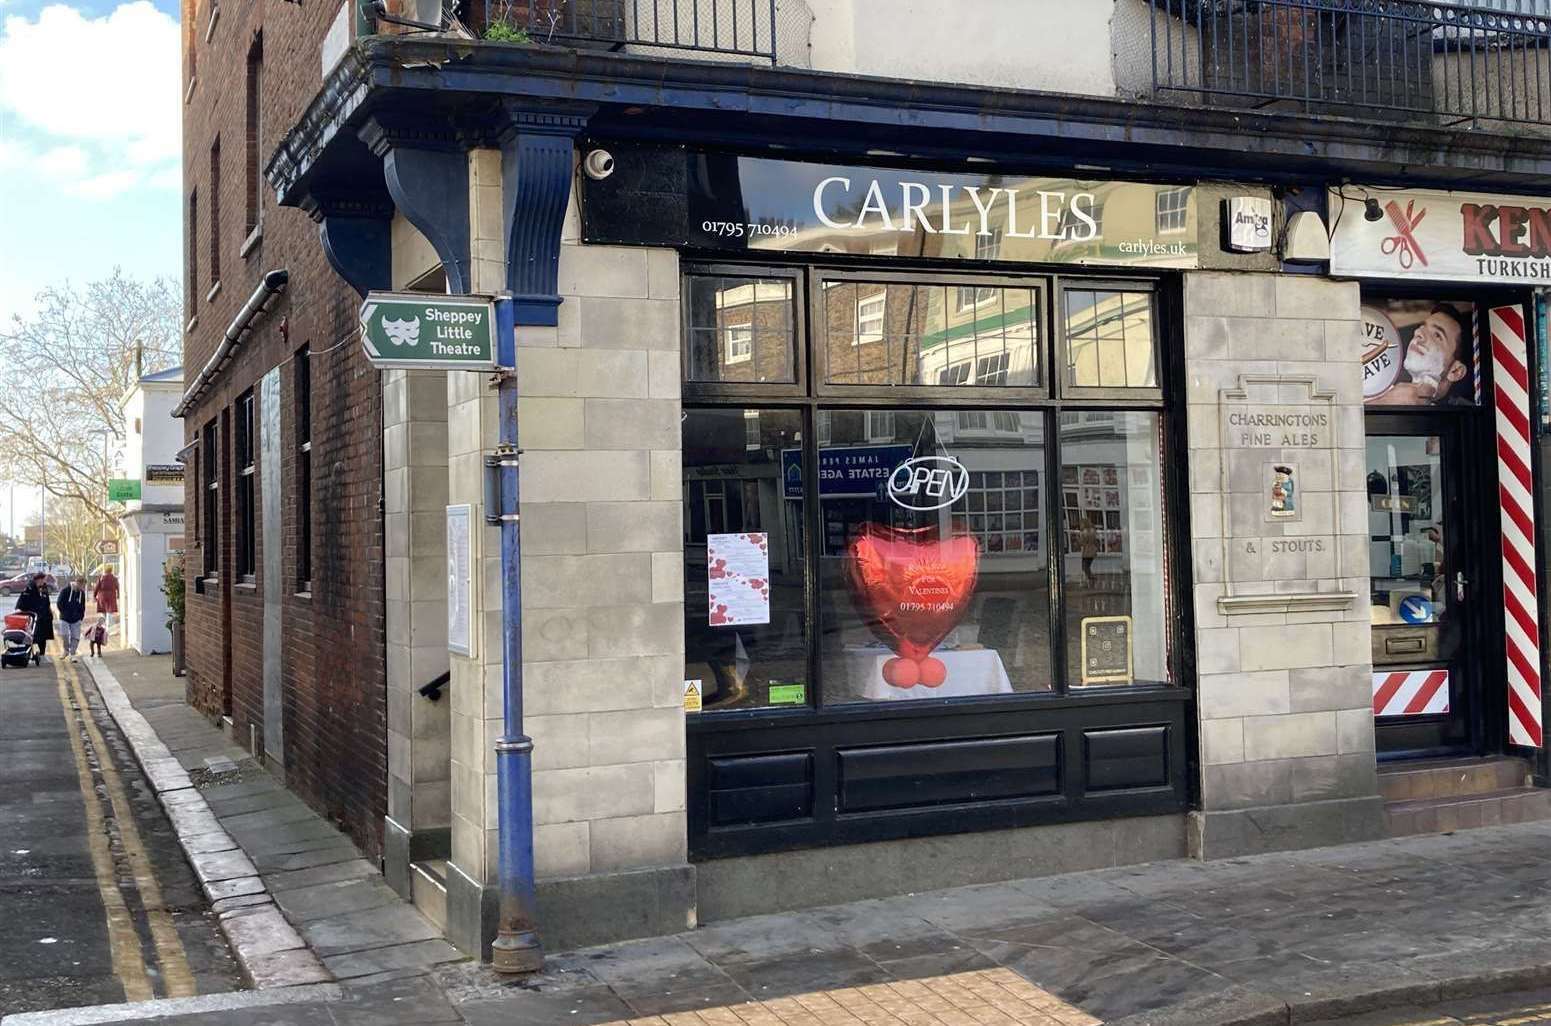 Carlyle's in Sheerness has had a difficult journey before closing its doors. Picture: John Nurden